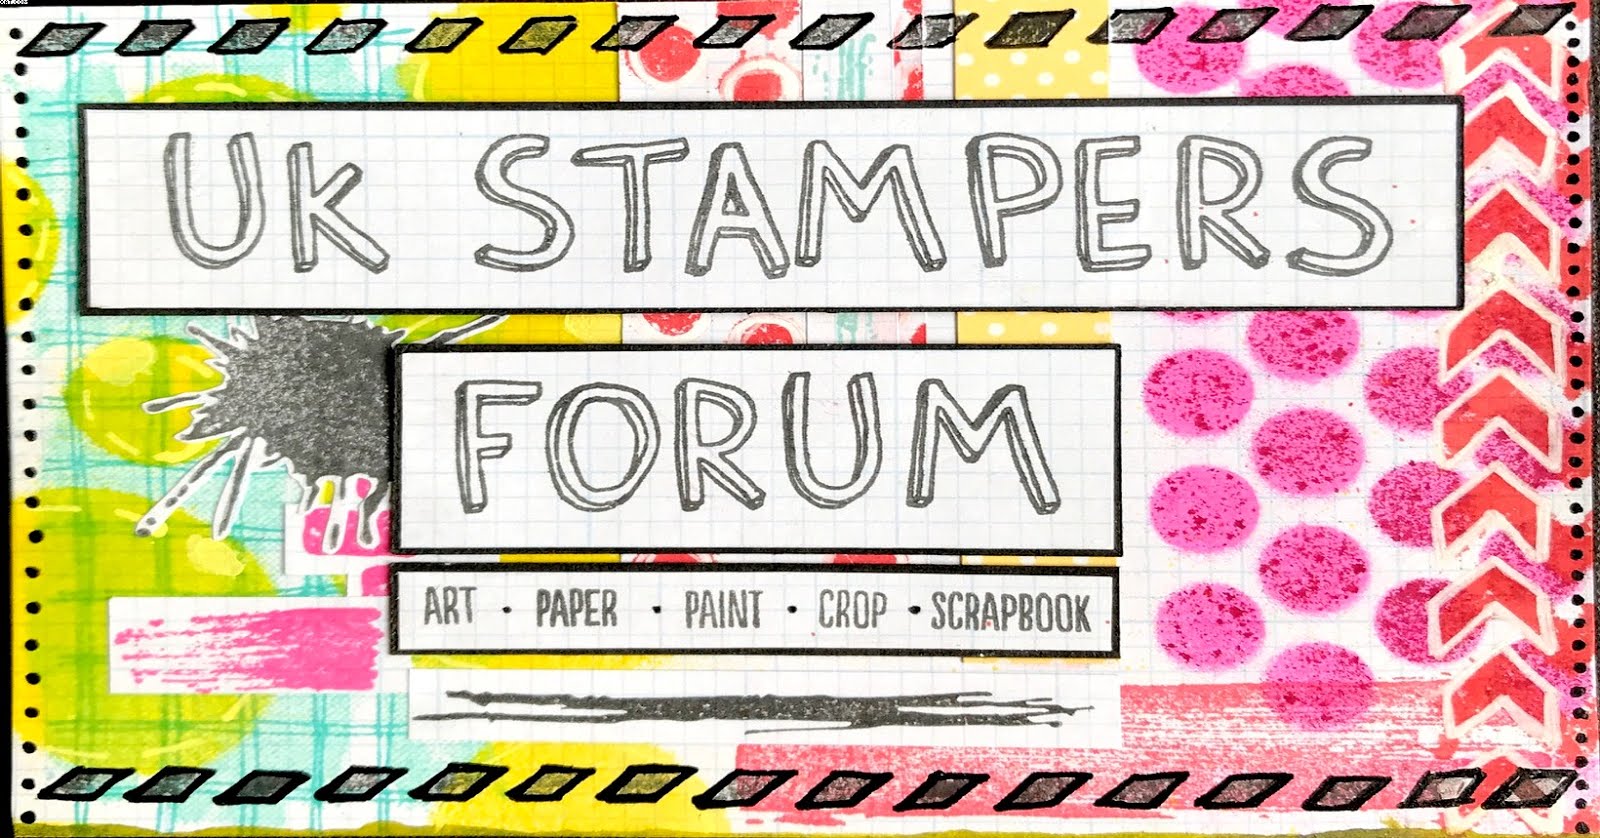 Why Not Join UK Stampers Forum, It's free, friendly & fun ....Just Click the Logo